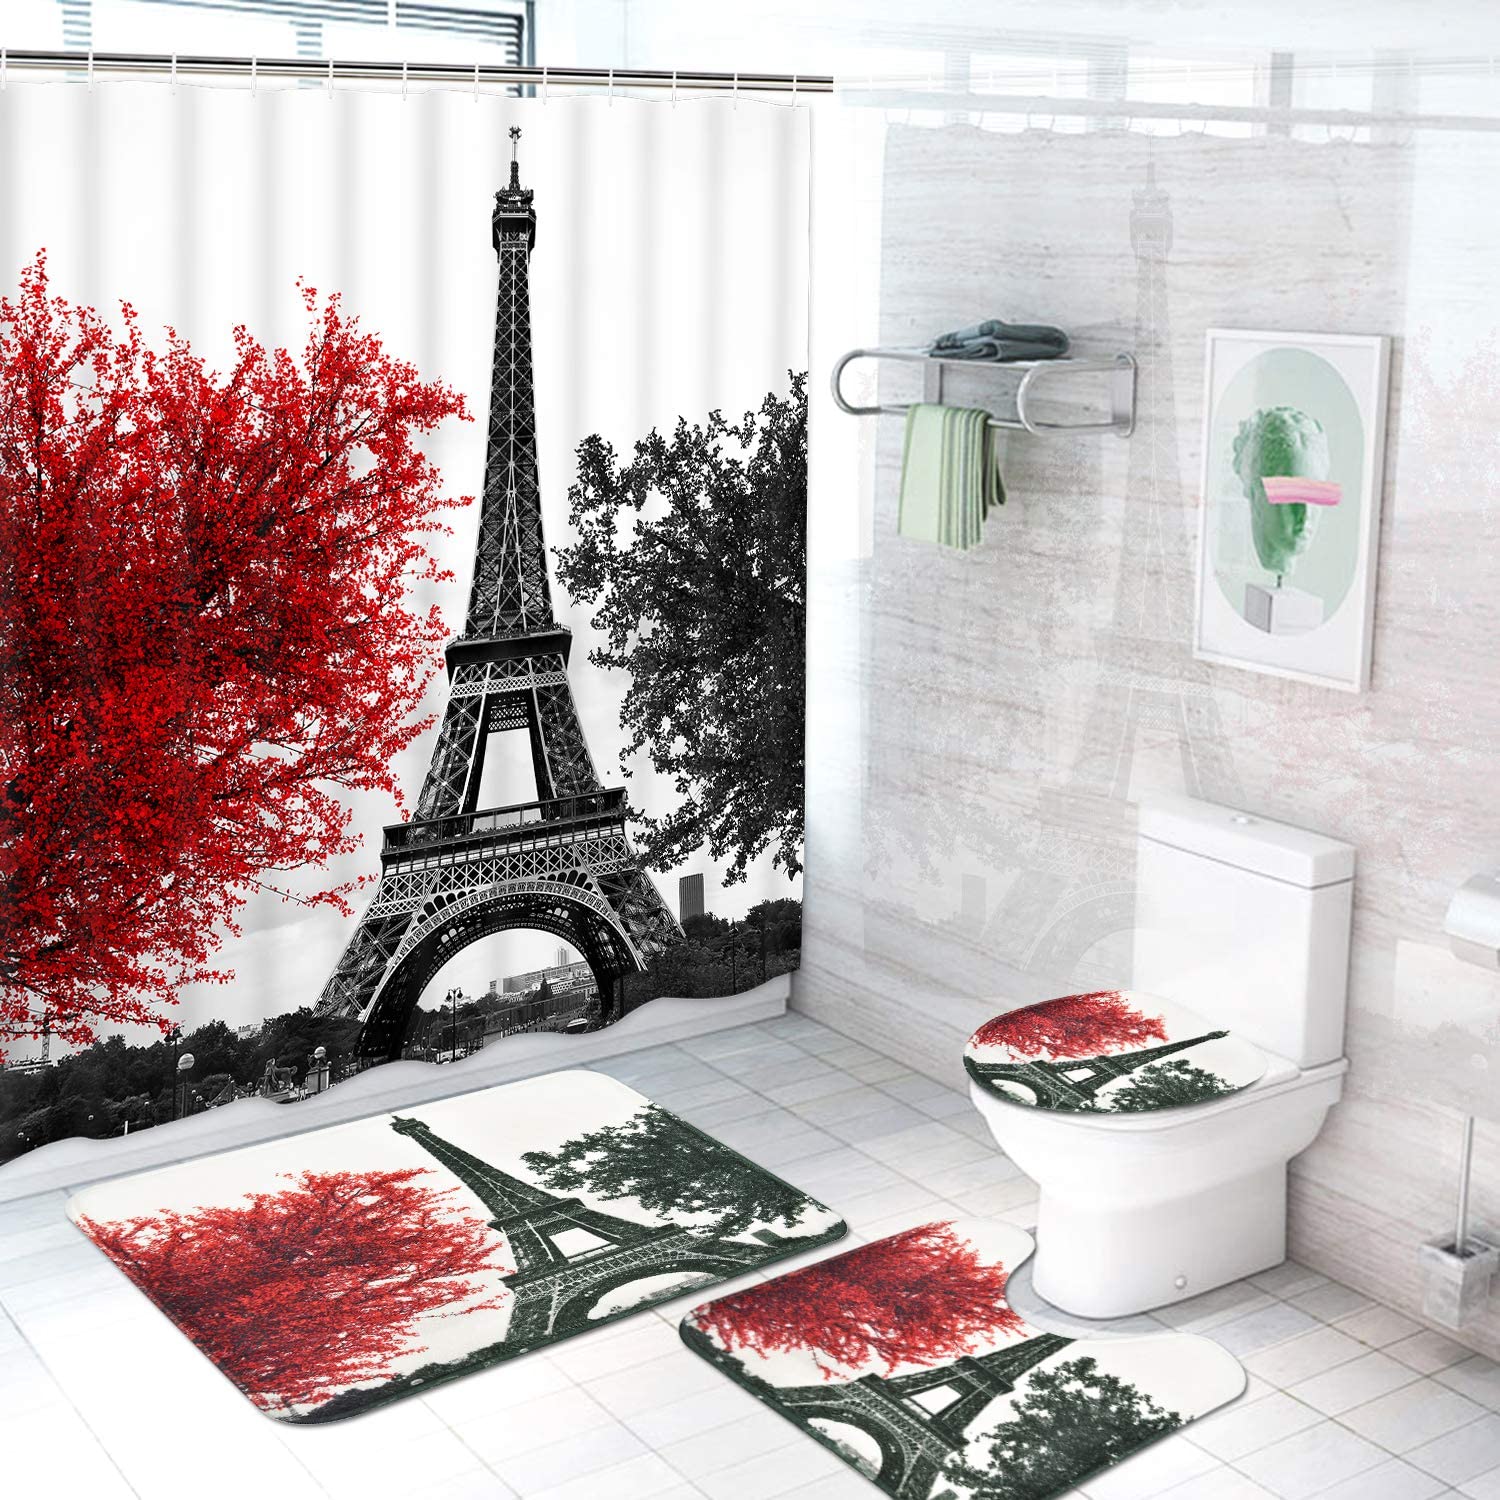 Pknoclan 4 Pcs Floral Shower Curtain Sets with Non-Slip Rugs, Toilet Lid Cover a Niedrogi zwykły sklep